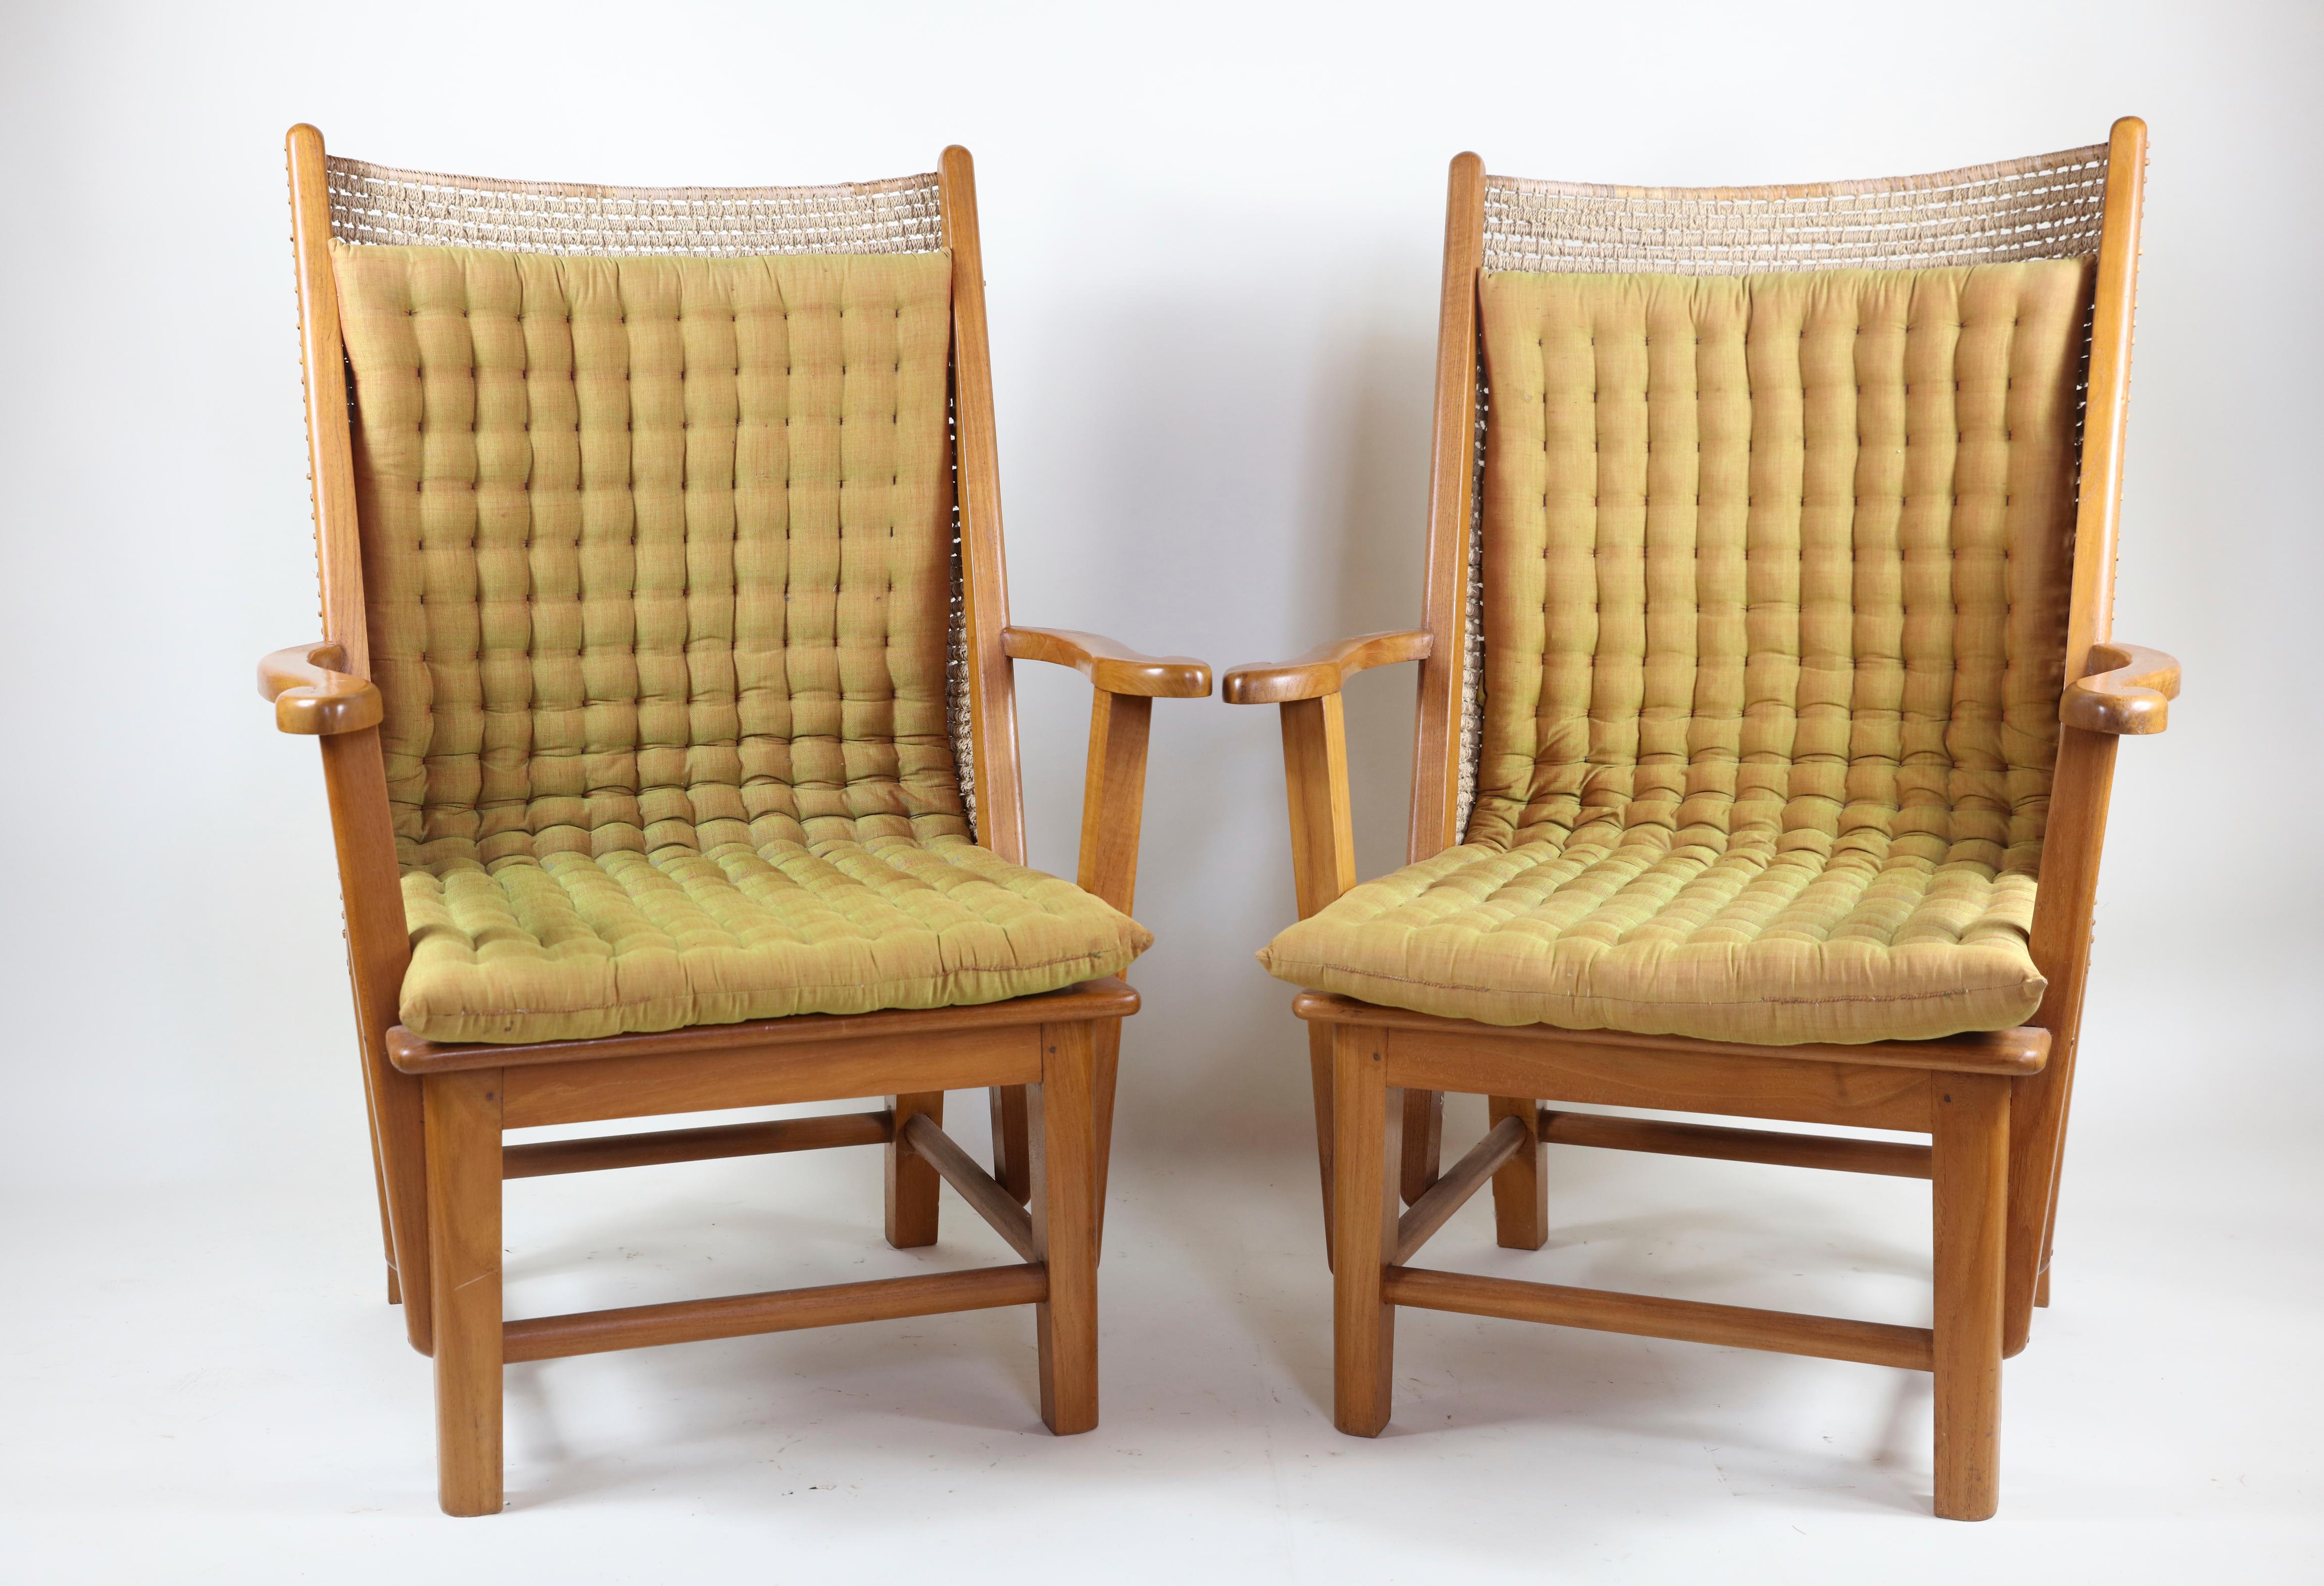 Pair of Woven Jute High Back Chairs with Cushions
Please inquire about time period